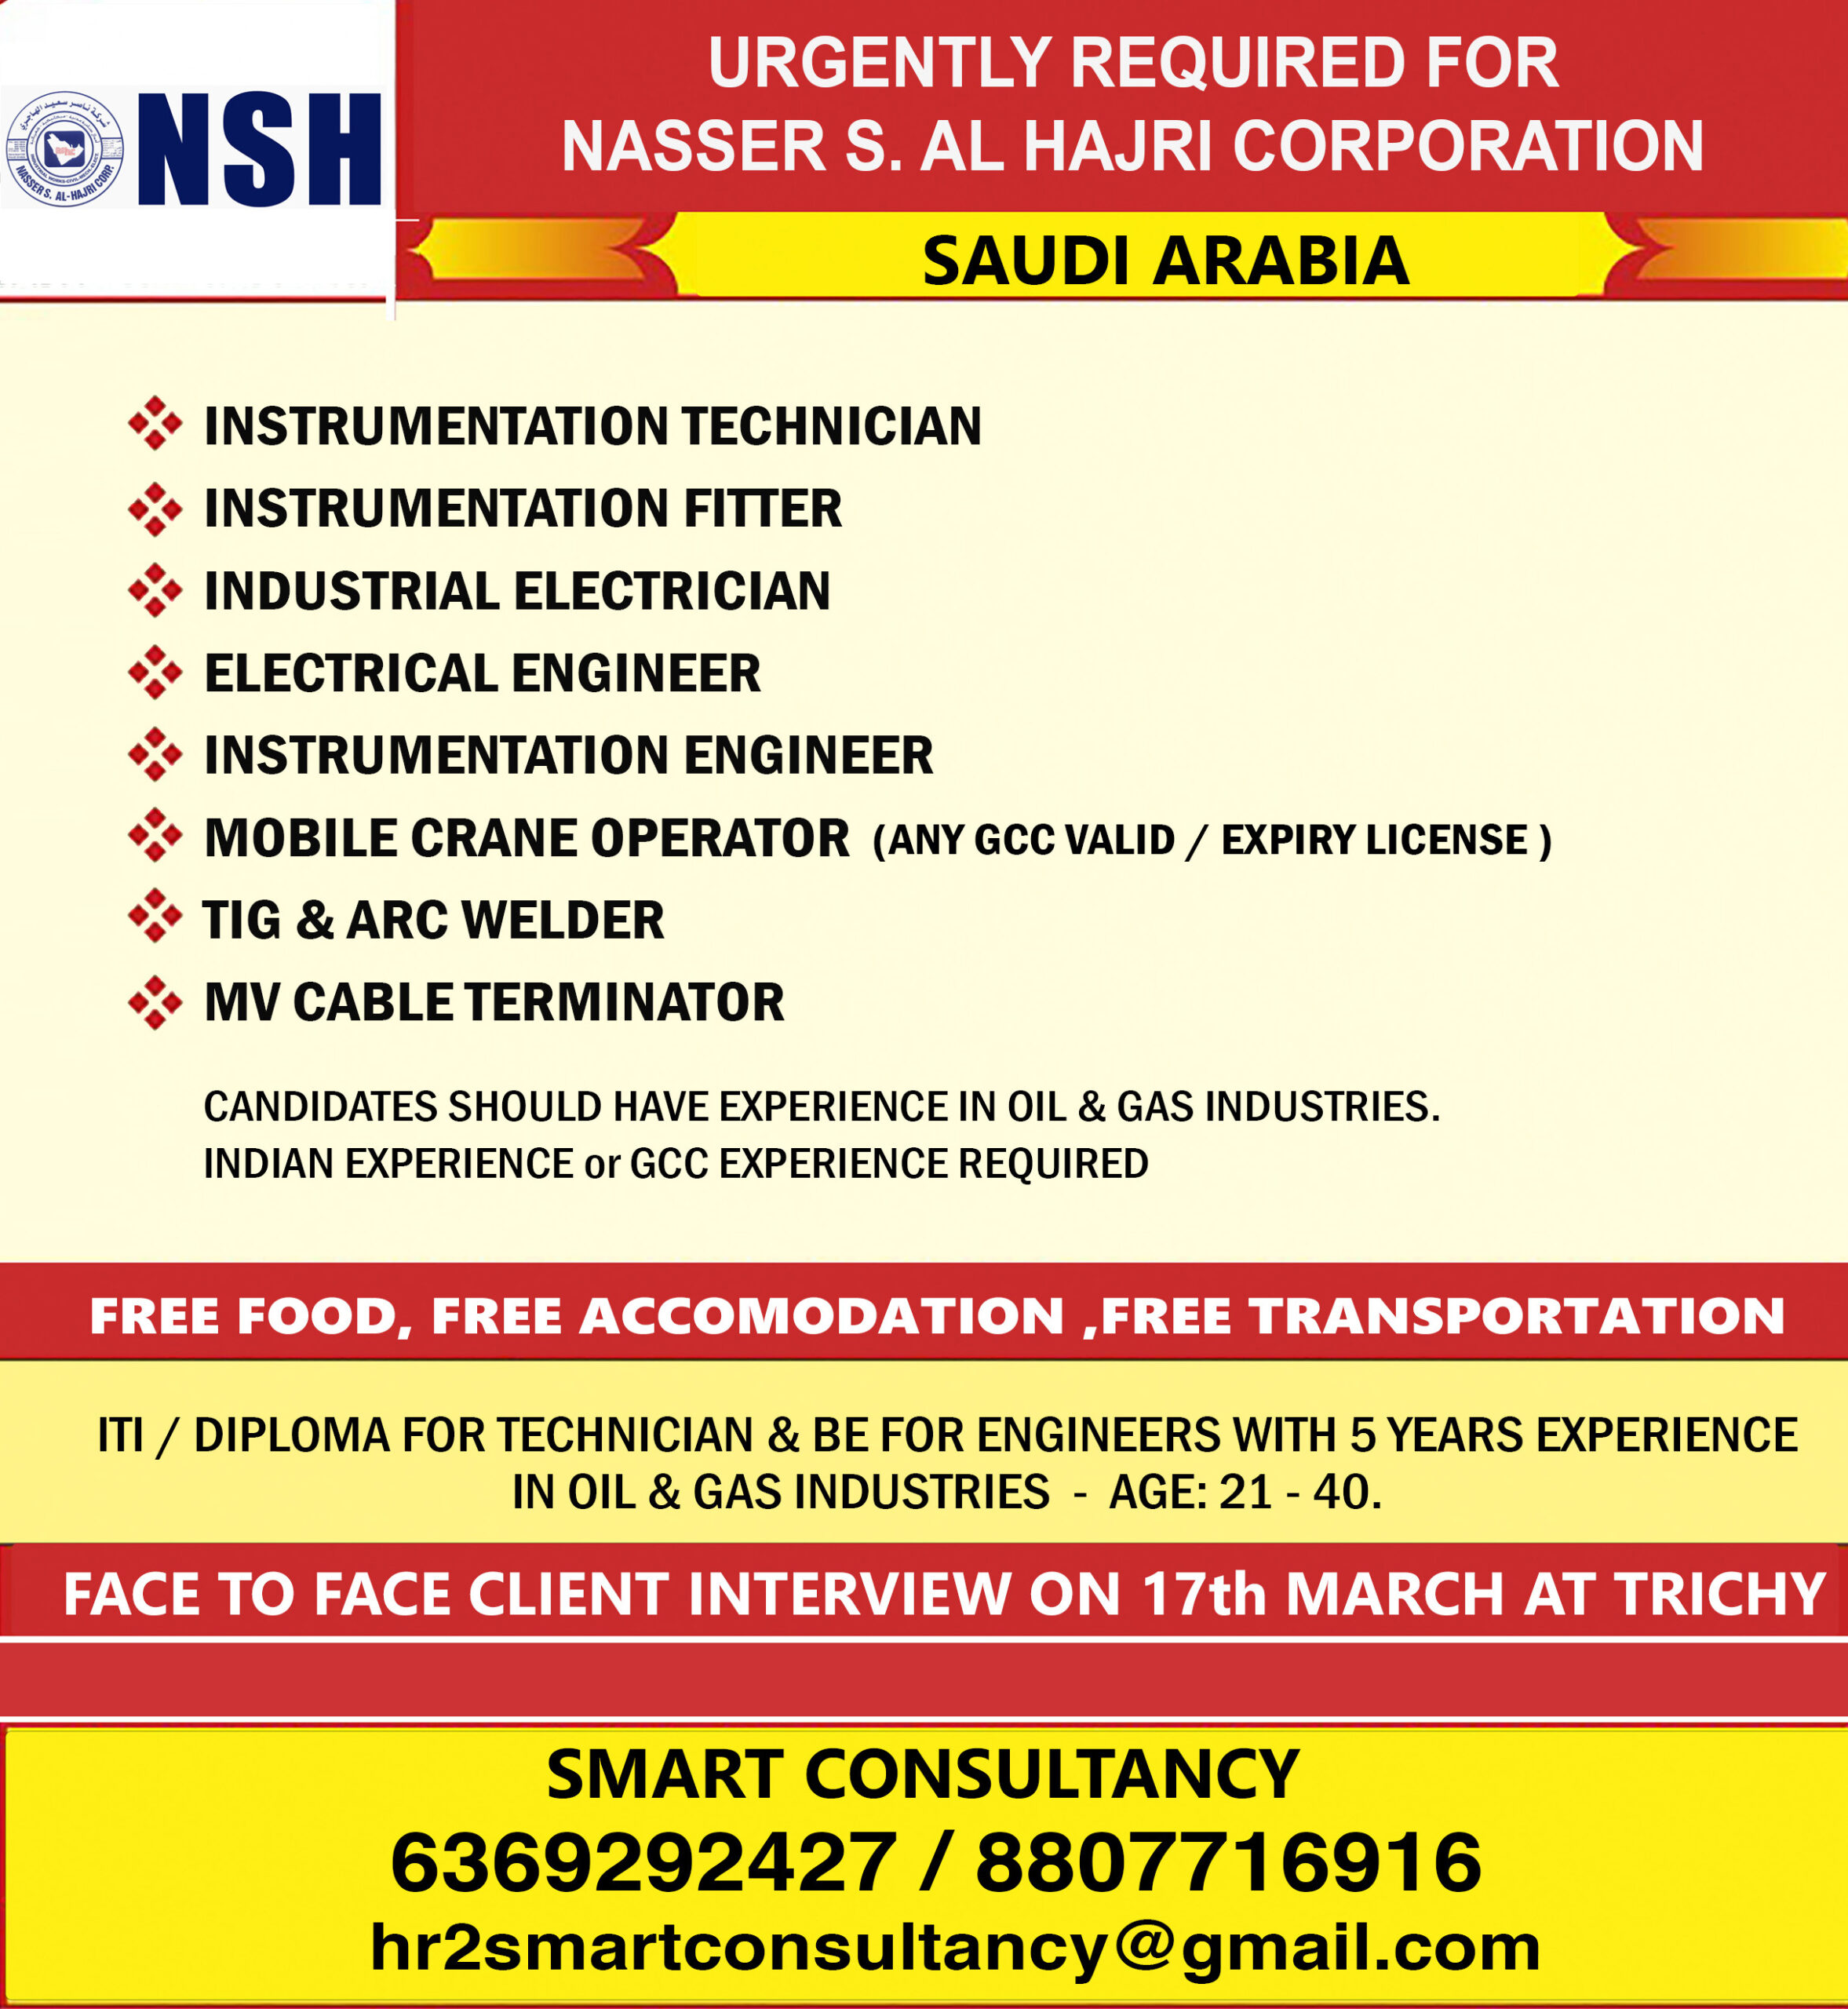 Direct Client interview on March 17th in TRICHY * ( NSH – KSA )